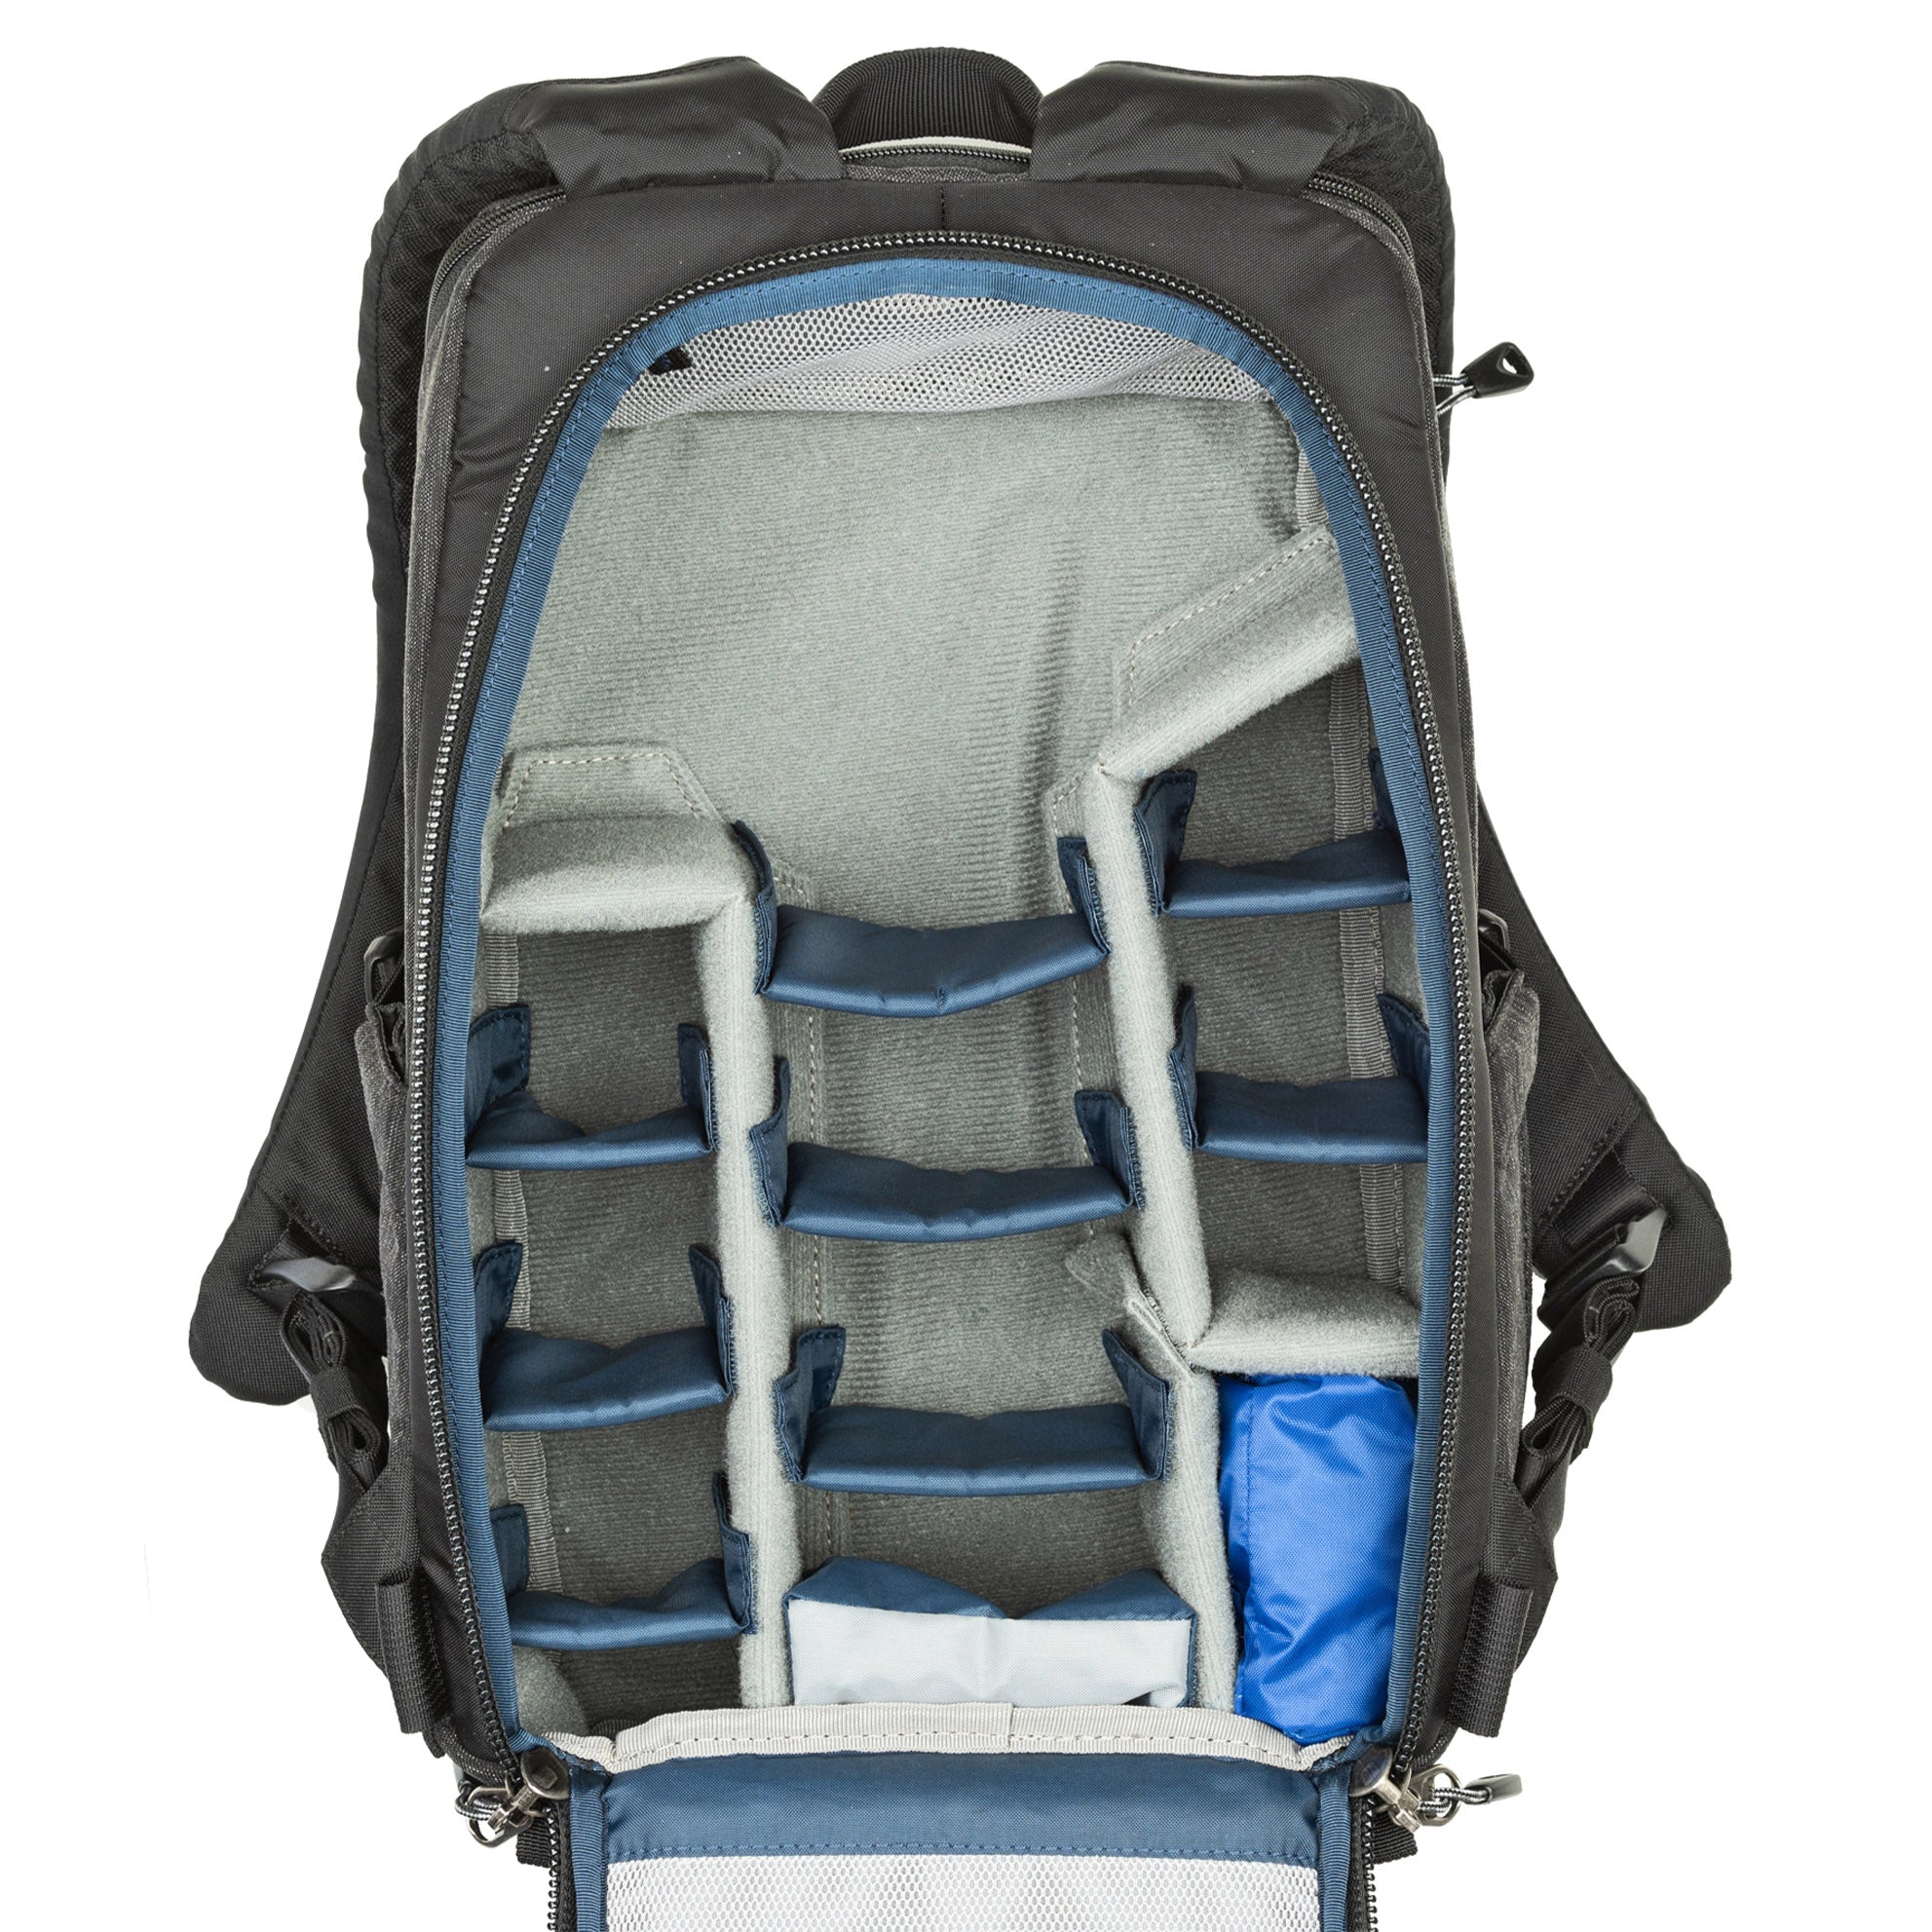 Customizable divider system maximizes photo carry with two cushioned pillows that shape to your gear for secure protection